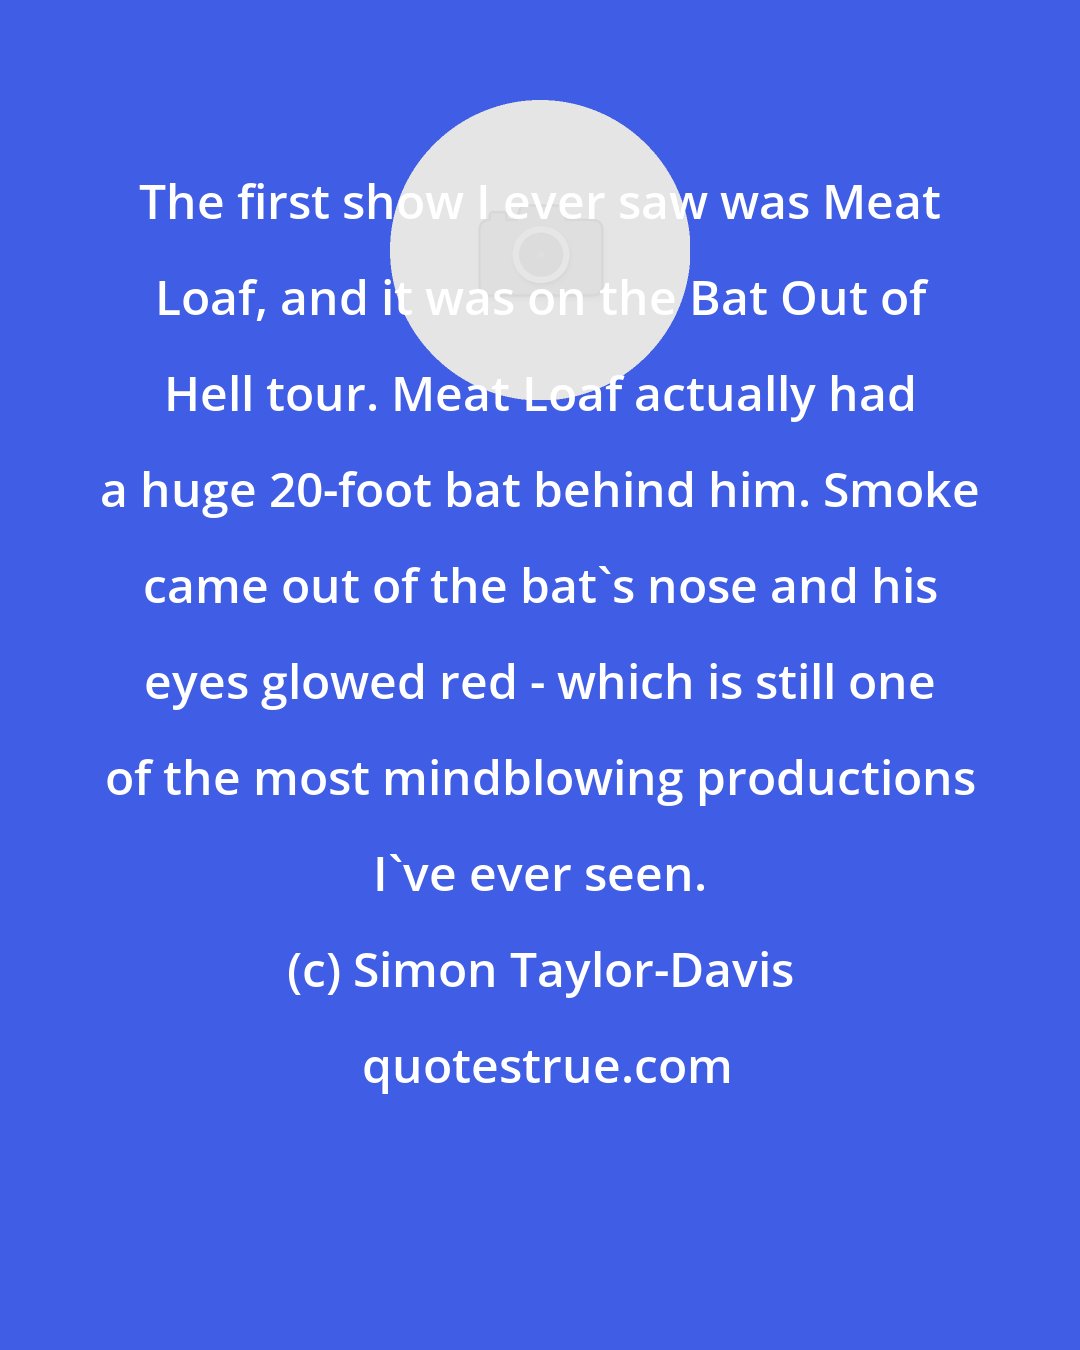 Simon Taylor-Davis: The first show I ever saw was Meat Loaf, and it was on the Bat Out of Hell tour. Meat Loaf actually had a huge 20-foot bat behind him. Smoke came out of the bat's nose and his eyes glowed red - which is still one of the most mindblowing productions I've ever seen.